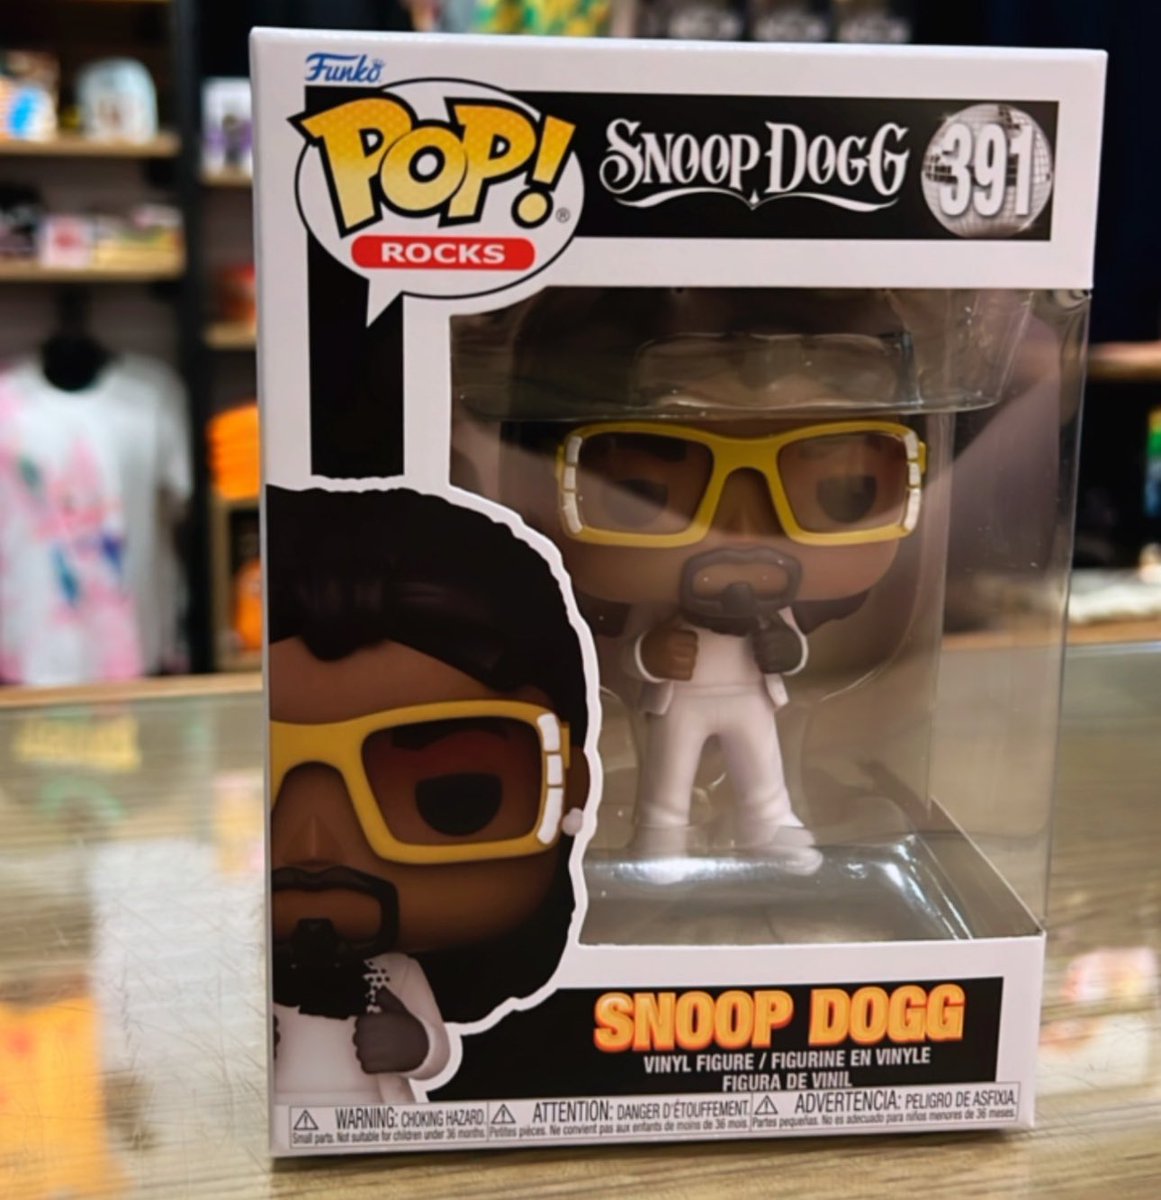 First look at a new Snoop Dogg Pop!
.
Credit @boxlunchontario
#SnoopDogg #Funko #FunkoPop #FunkoPopVinyl #Pop #PopVinyl #Collectibles #Collectible #FunkoCollector #FunkoPops #Collector #Toy #Toys #DisTrackers